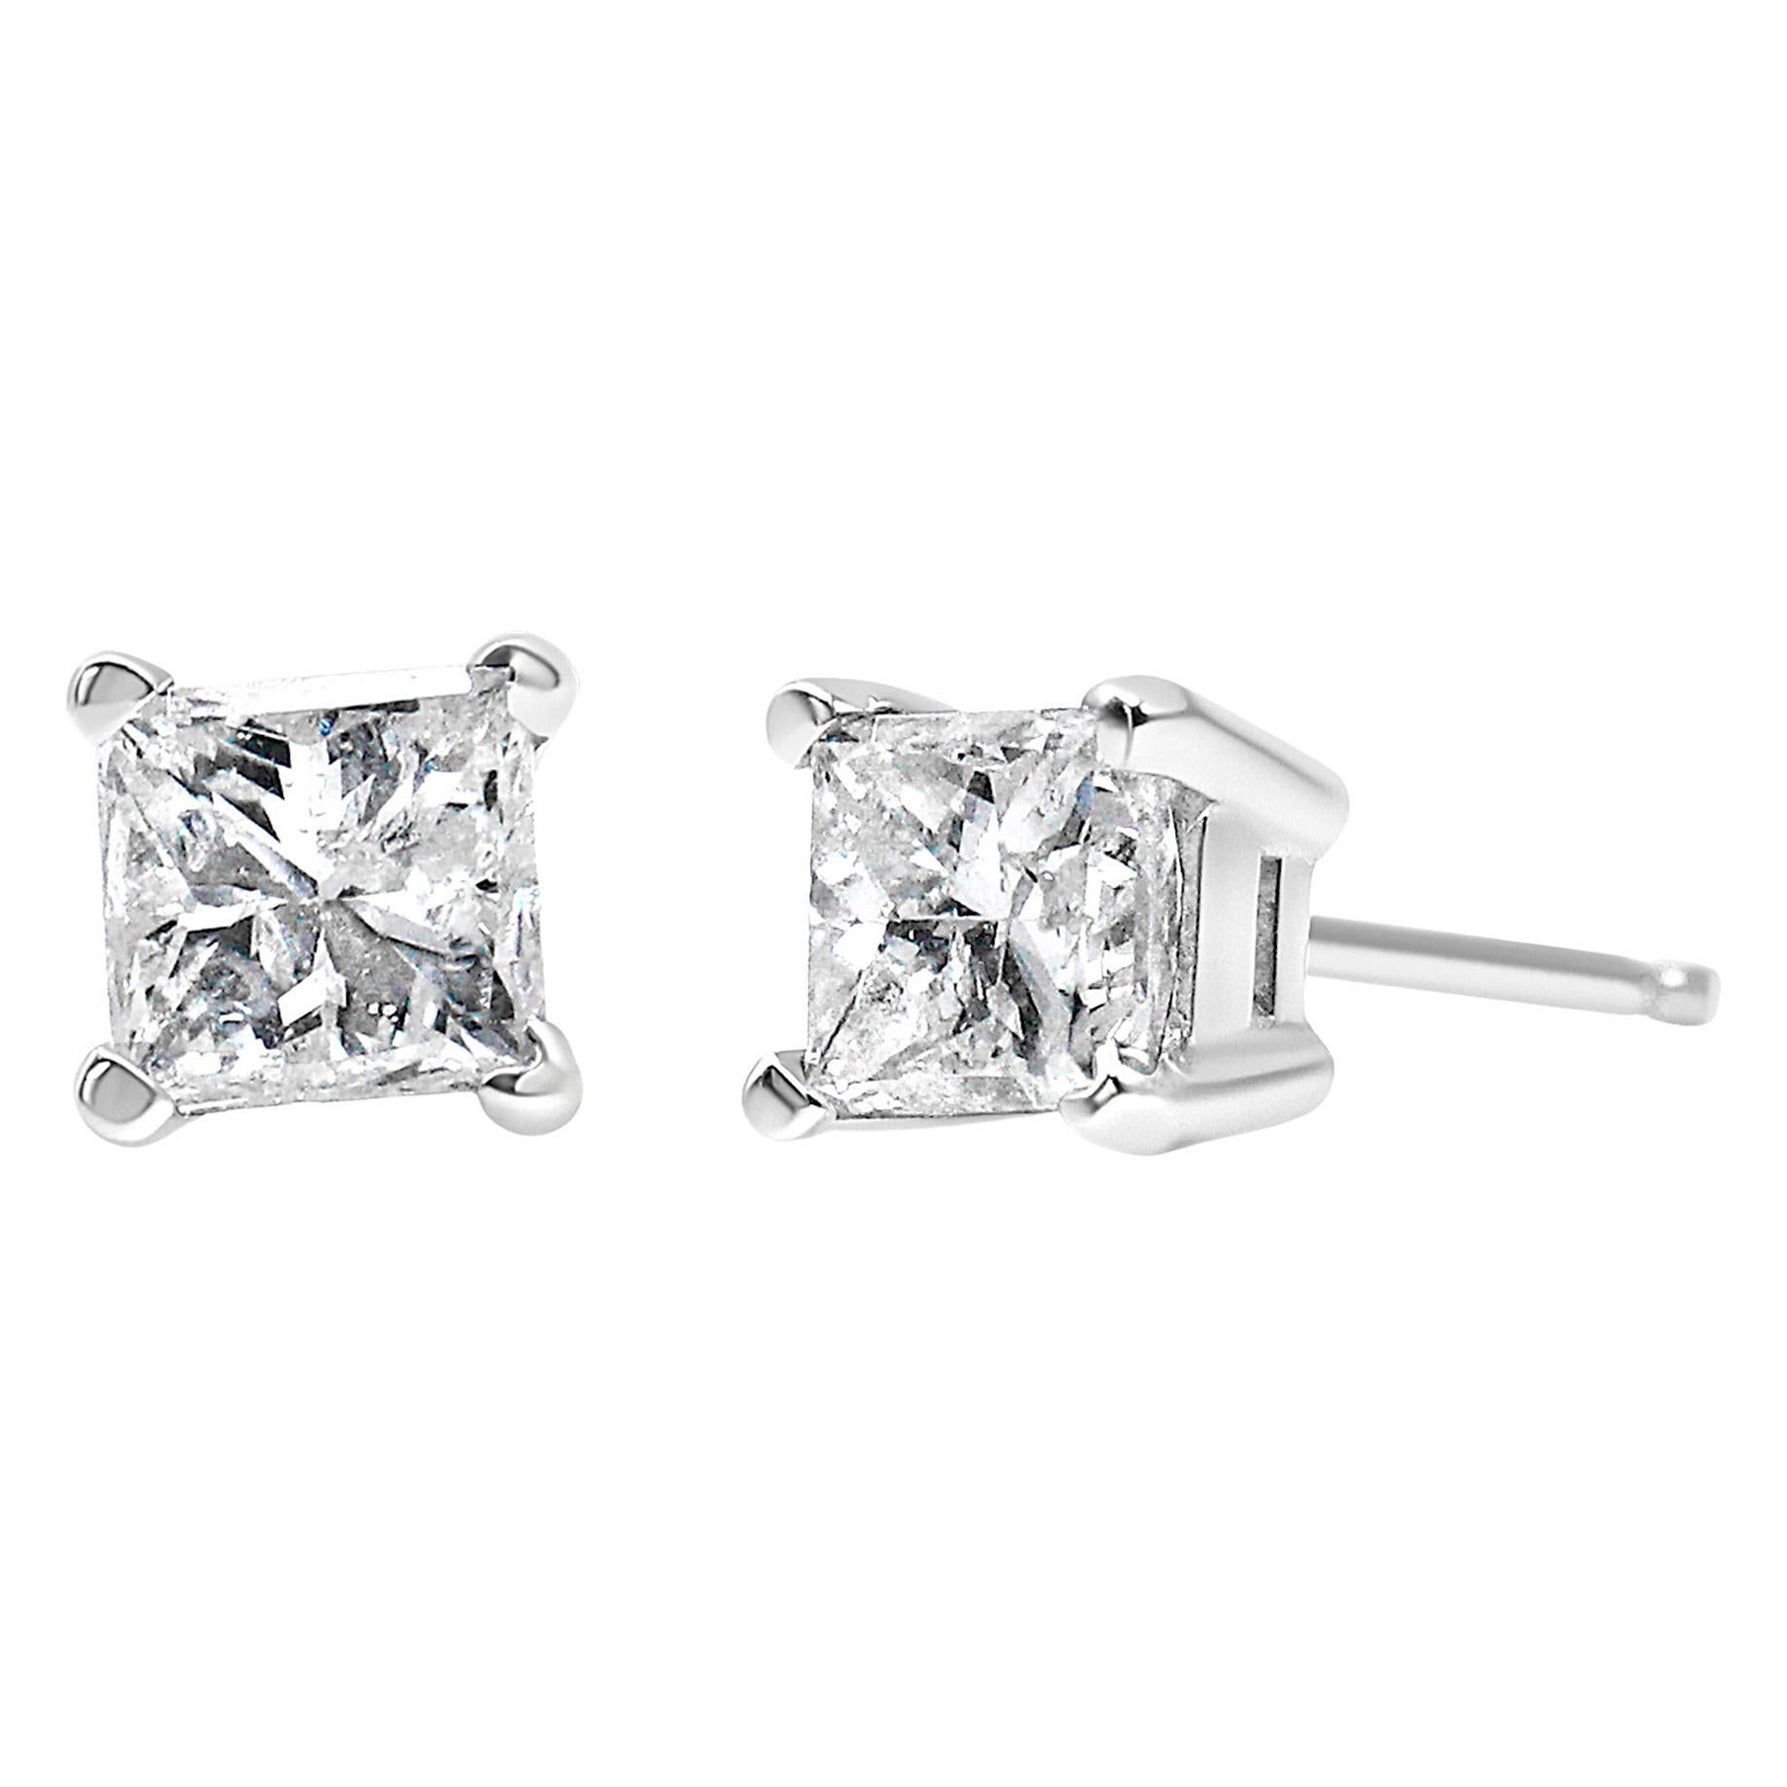 14K White Gold 1.0 Carat Square Near Colorless Diamond Solitaire Stud Earrings For Sale